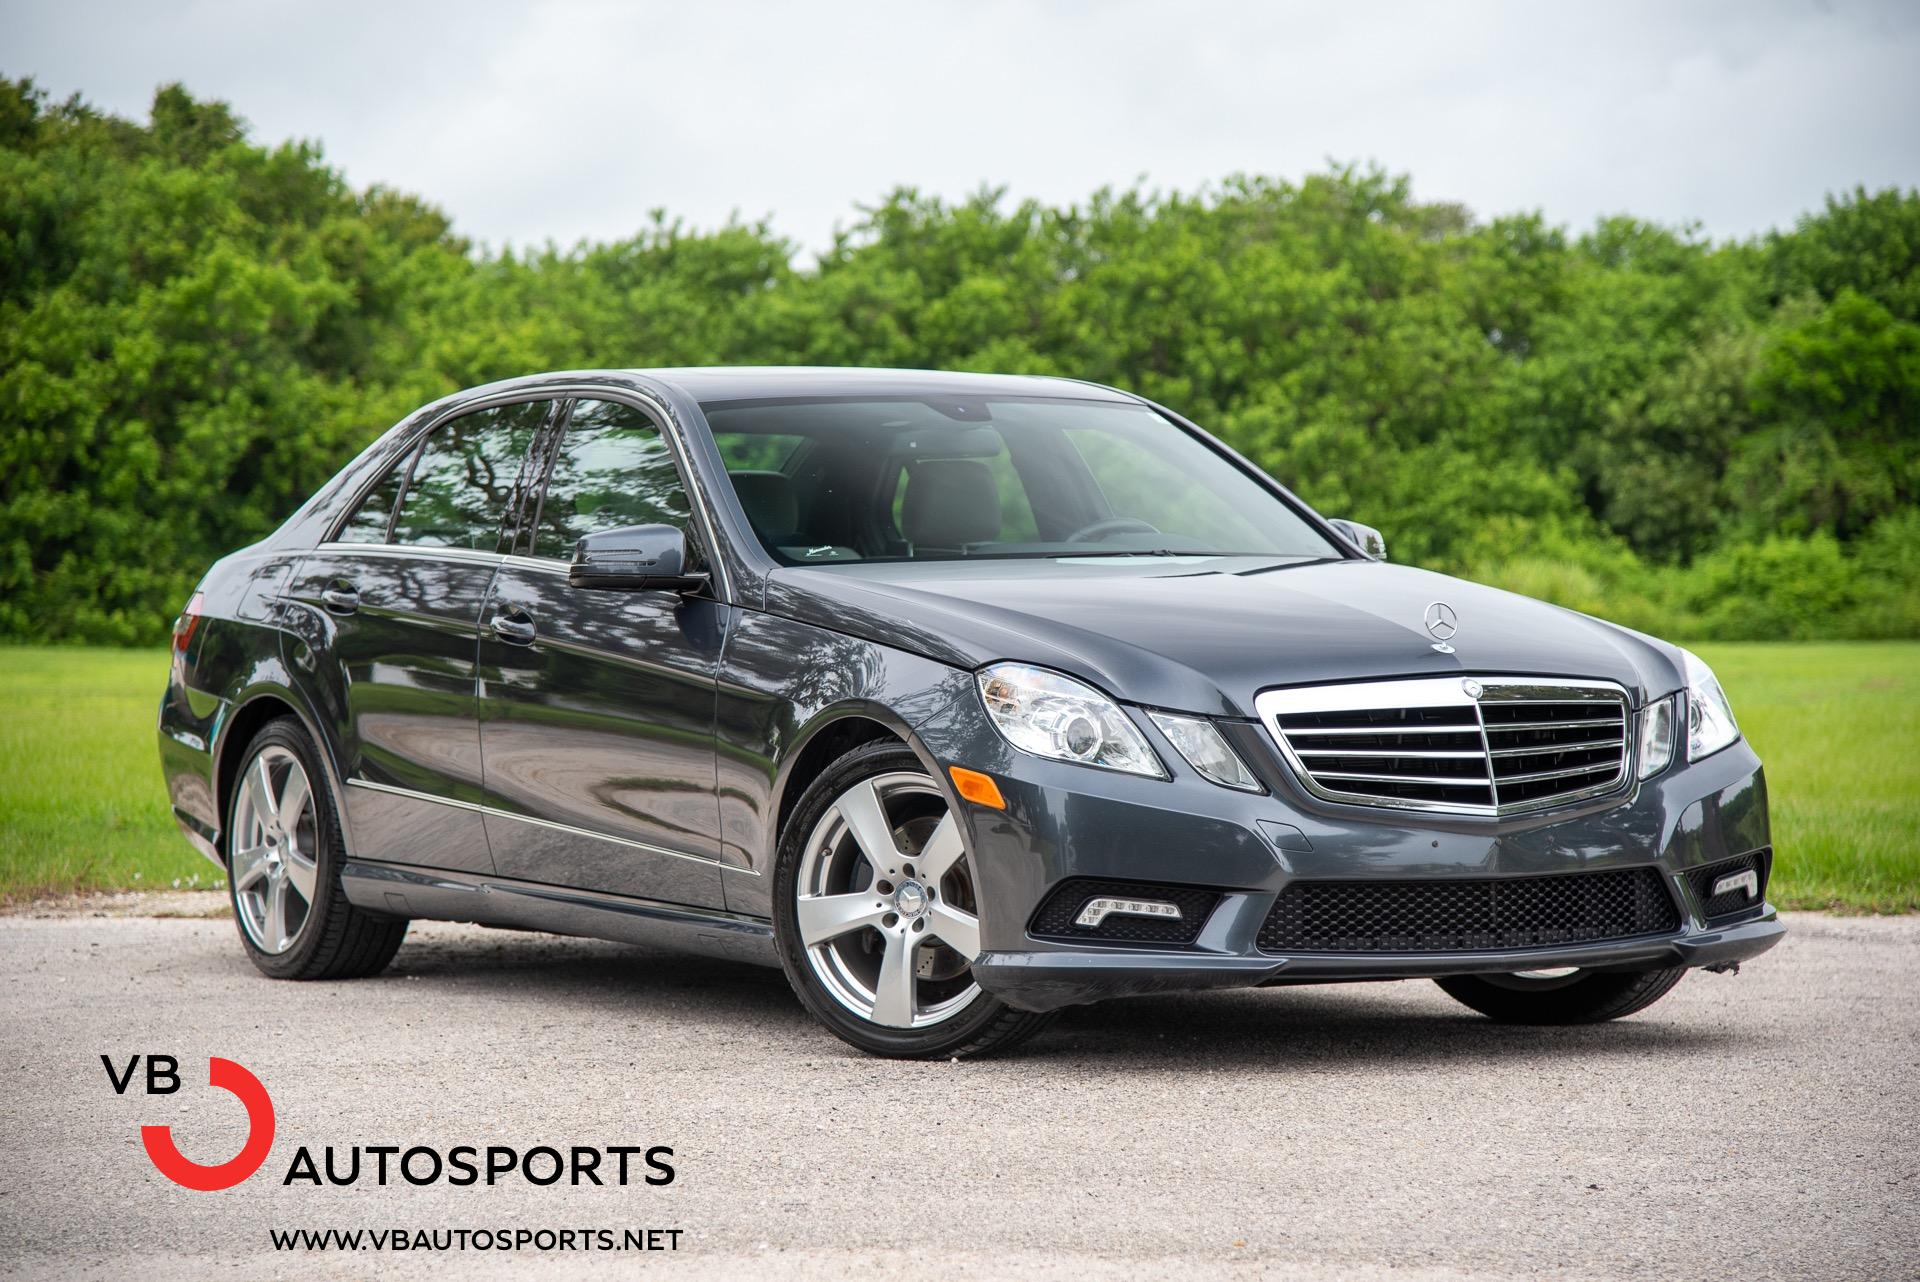 Used 11 Mercedes Benz E Class E 350 Luxury 4matic For Sale Sold Vb Autosports Stock Vb166